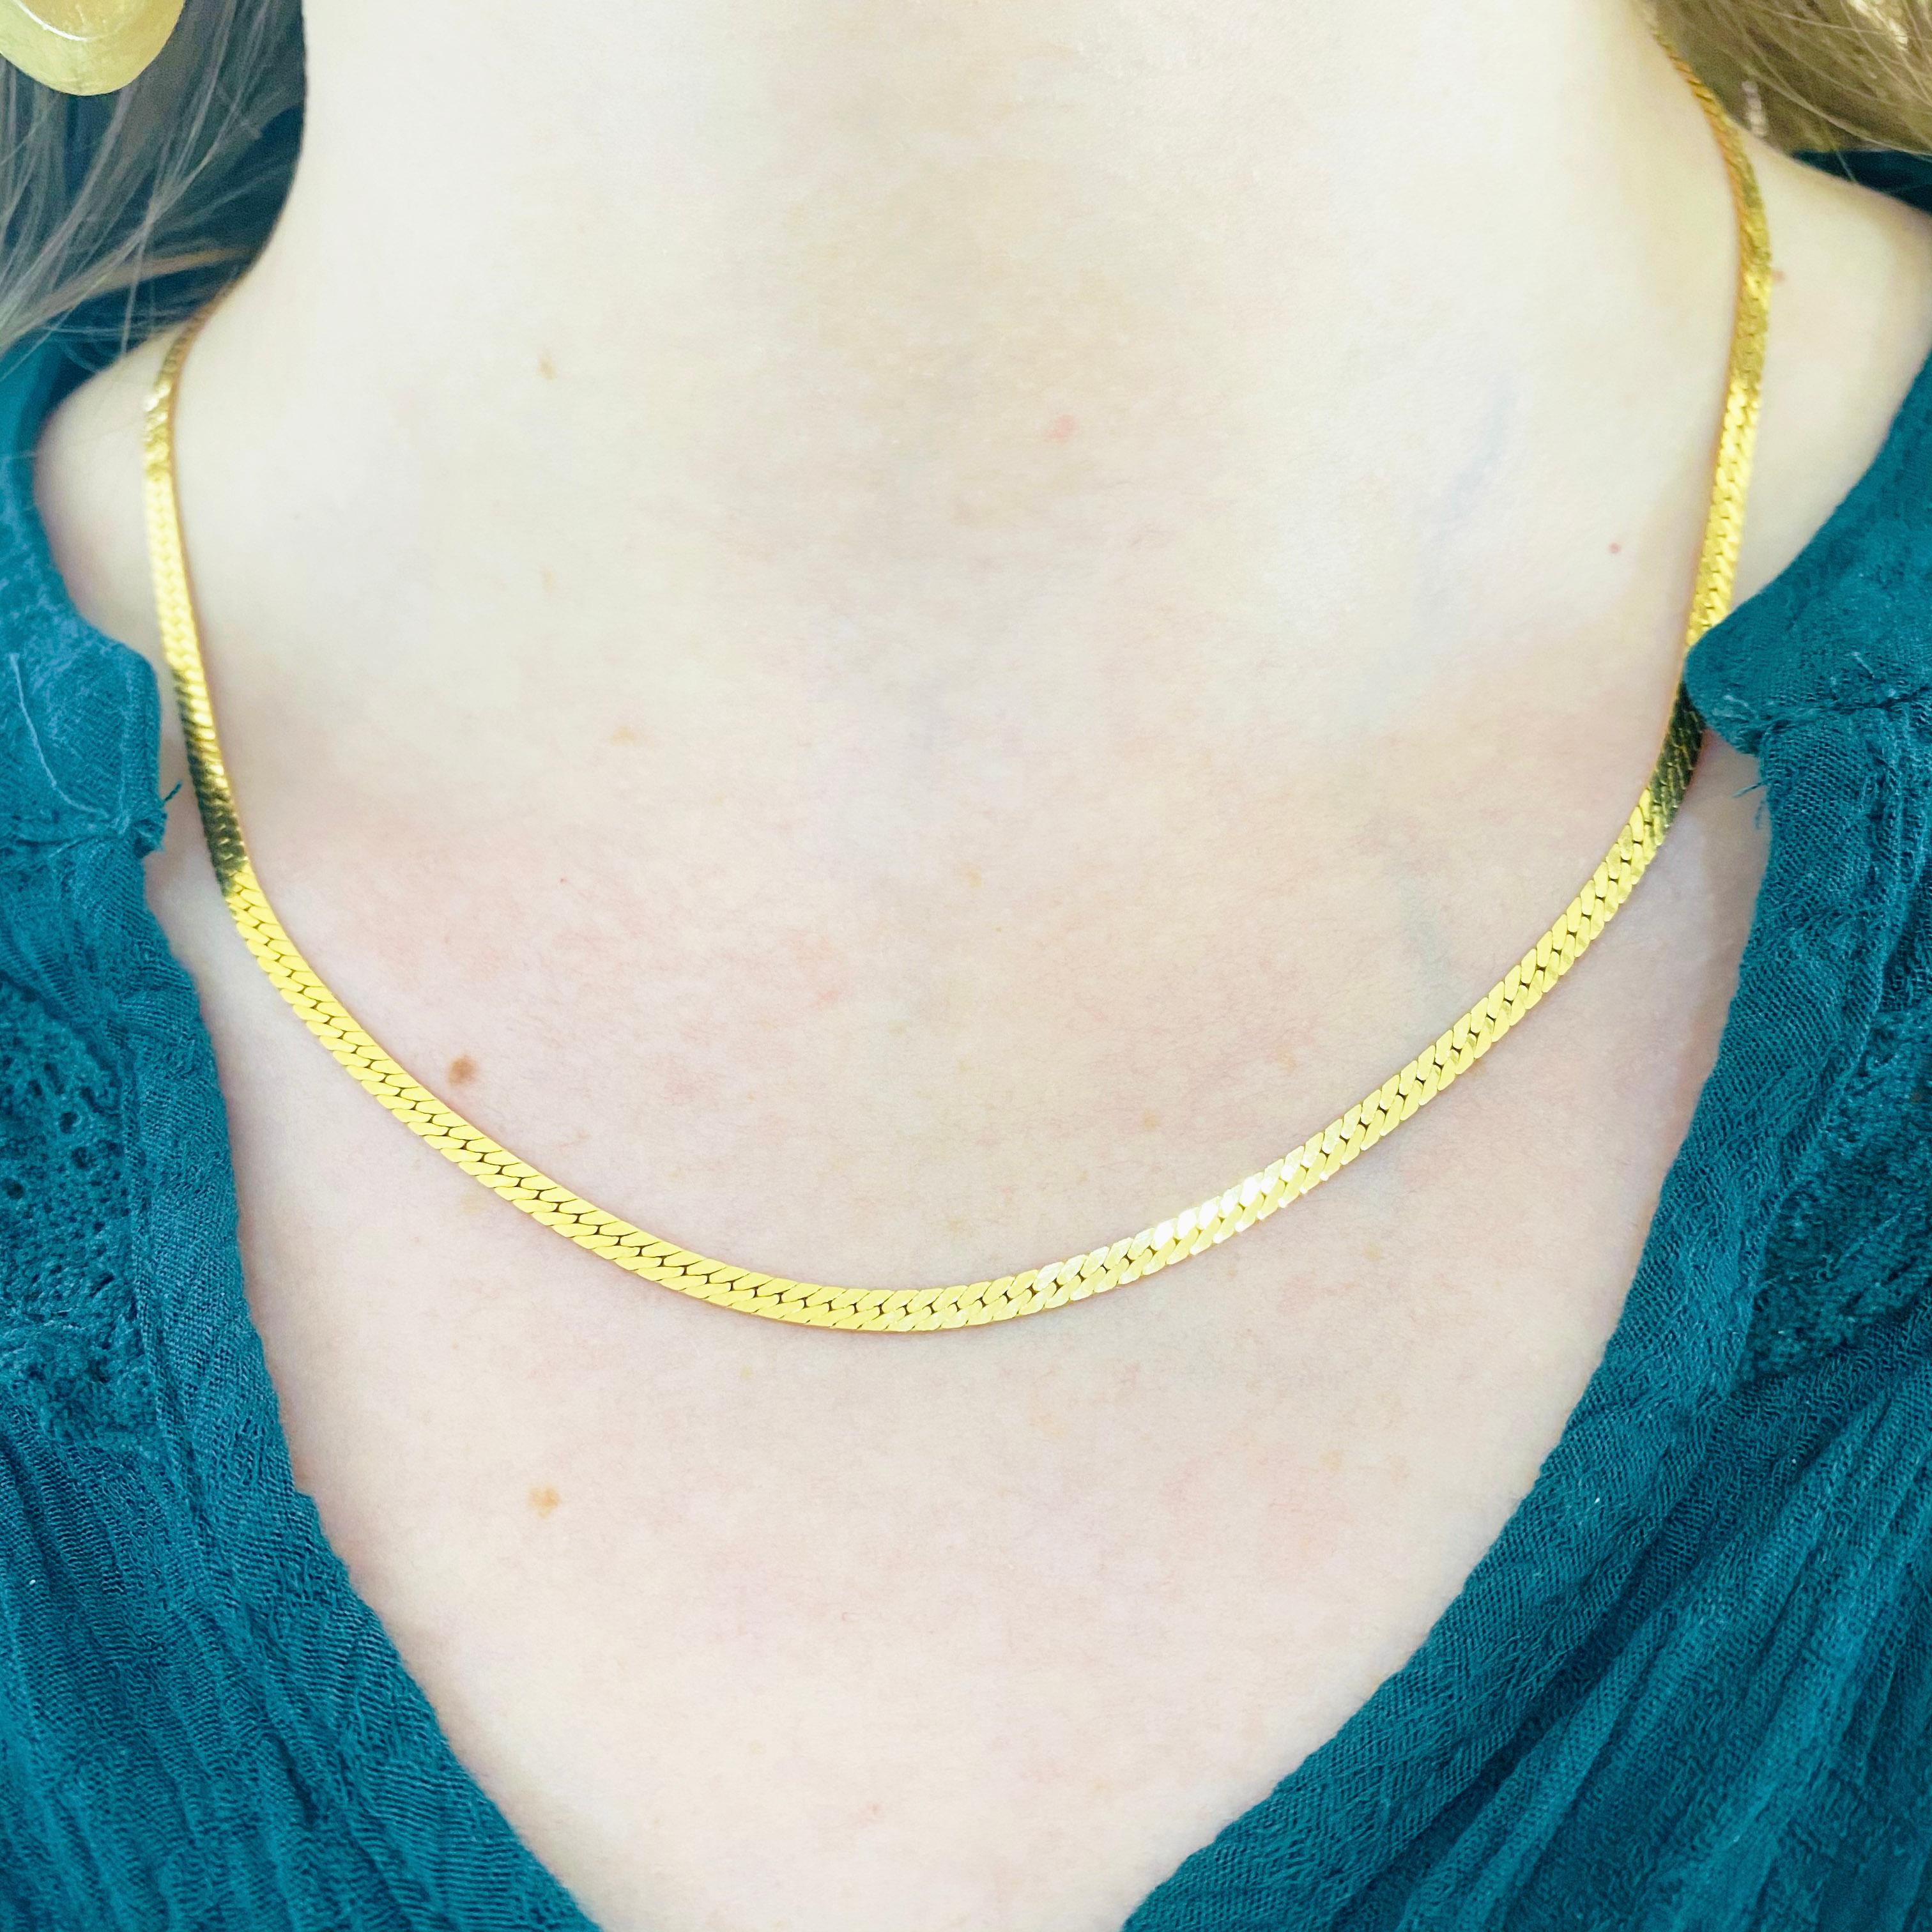 The 14 karat yellow gold herringbone chain, or flat gold chain style, which dates back to ancient Egyptian times, is a sophisticated design. It gets its name from the herringbone fish, a fish  known for their many parallel and slanted bones and this